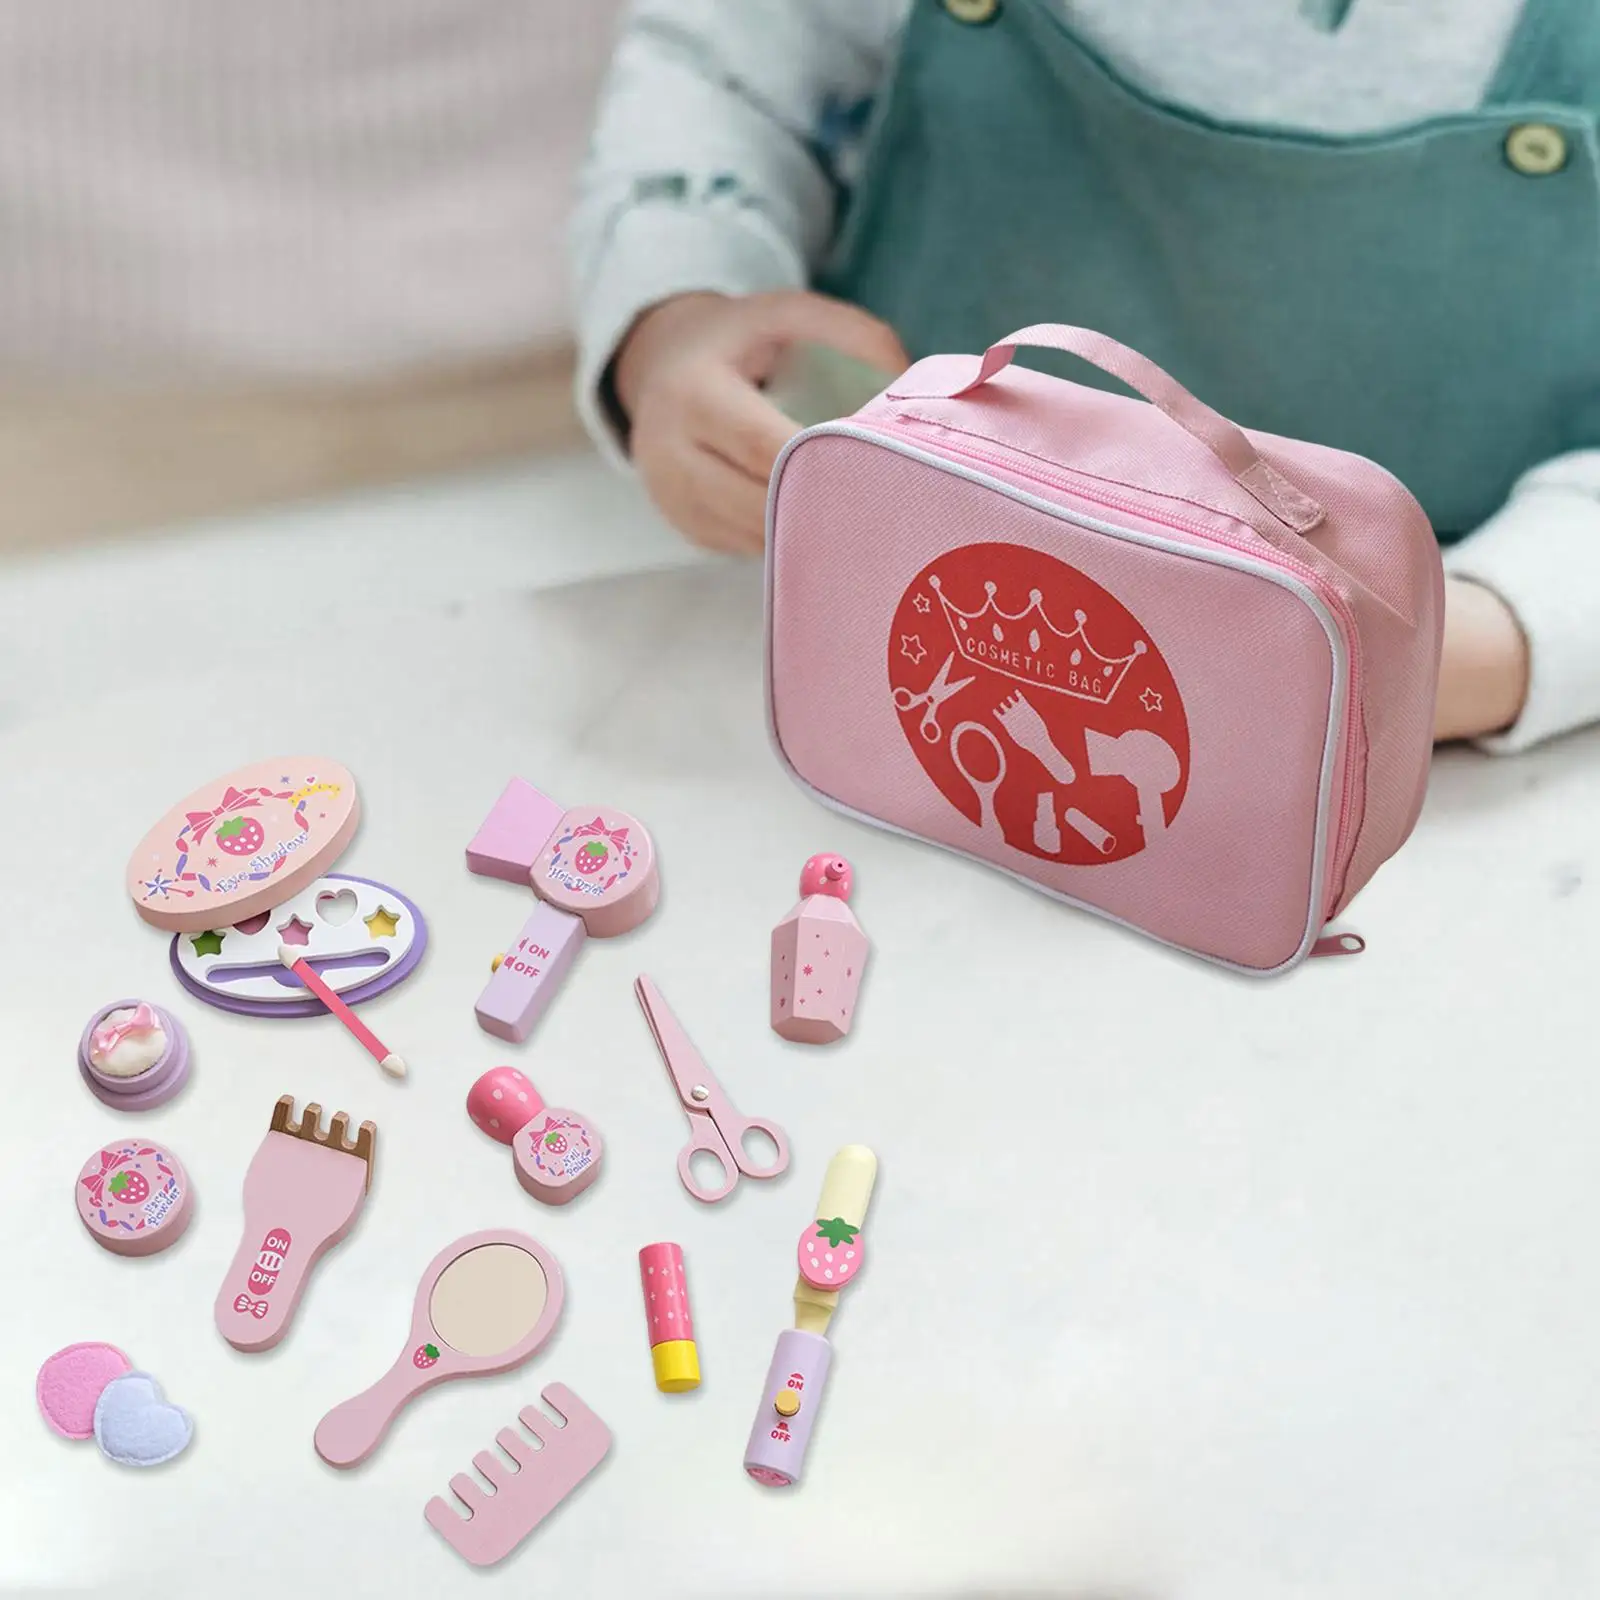 Miniature Pretend Makeup Game Washable Wooden with Cosmetic Bag Simulation Play House Toys Set for Game Role Play Toddler Girls